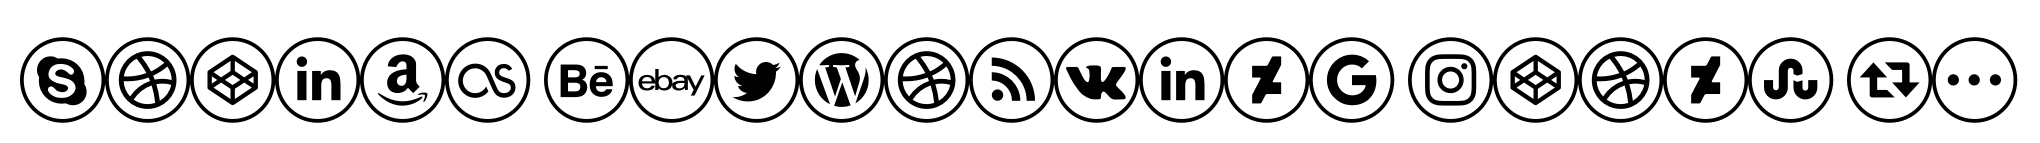 Social Networking Icons Outline image